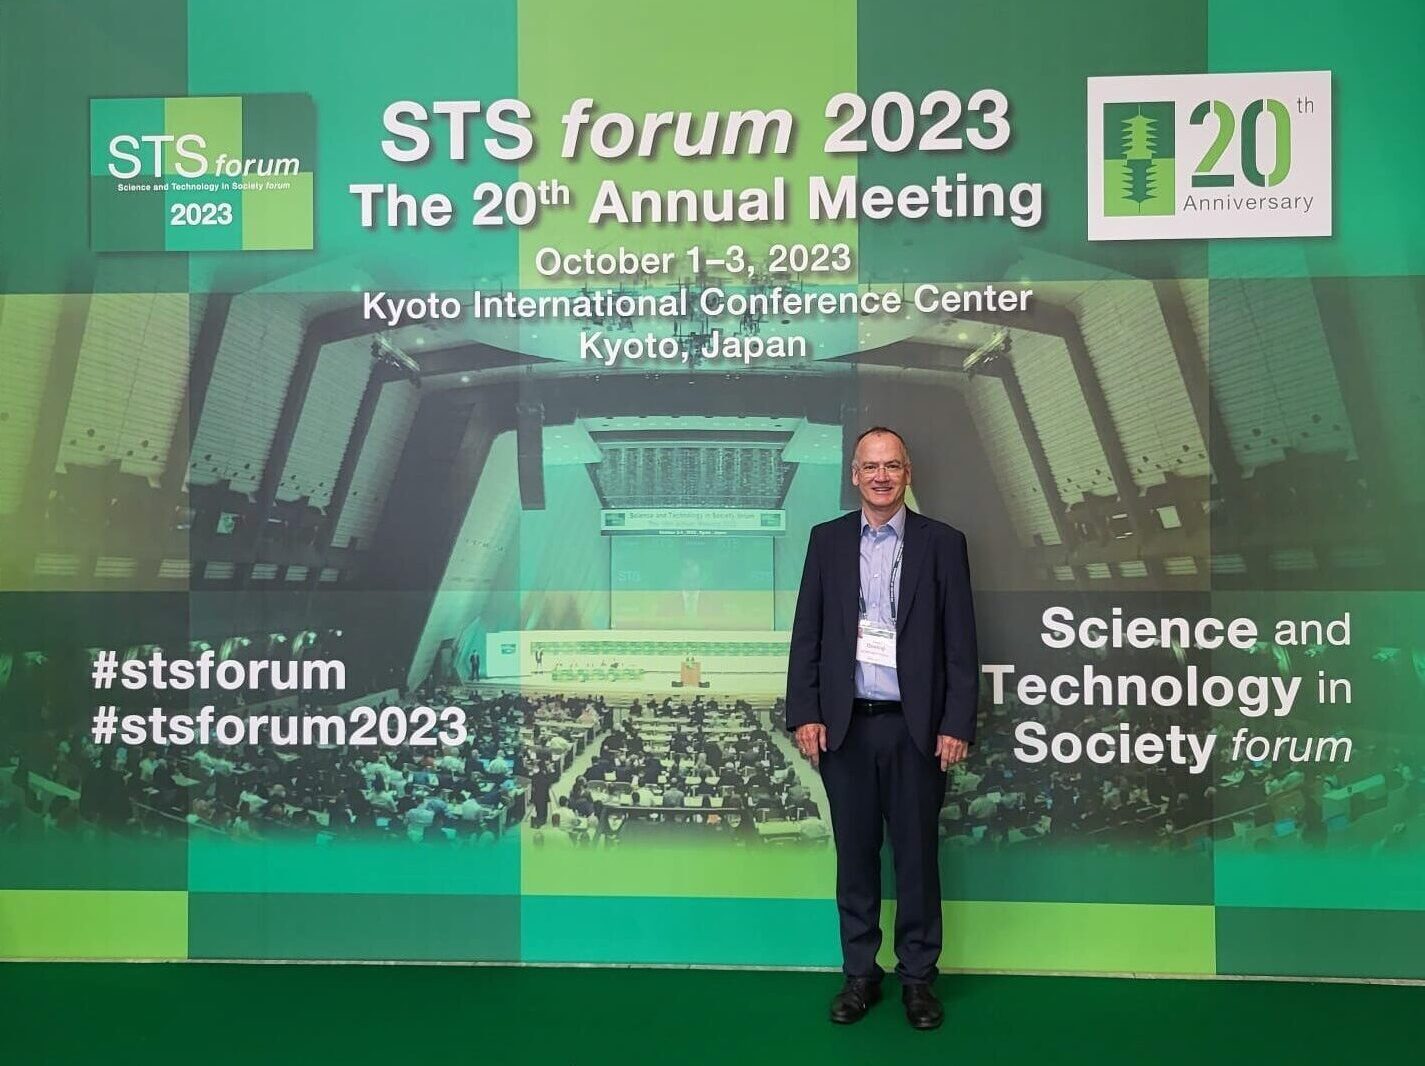 Michael Dowling at the STS forum 2023.